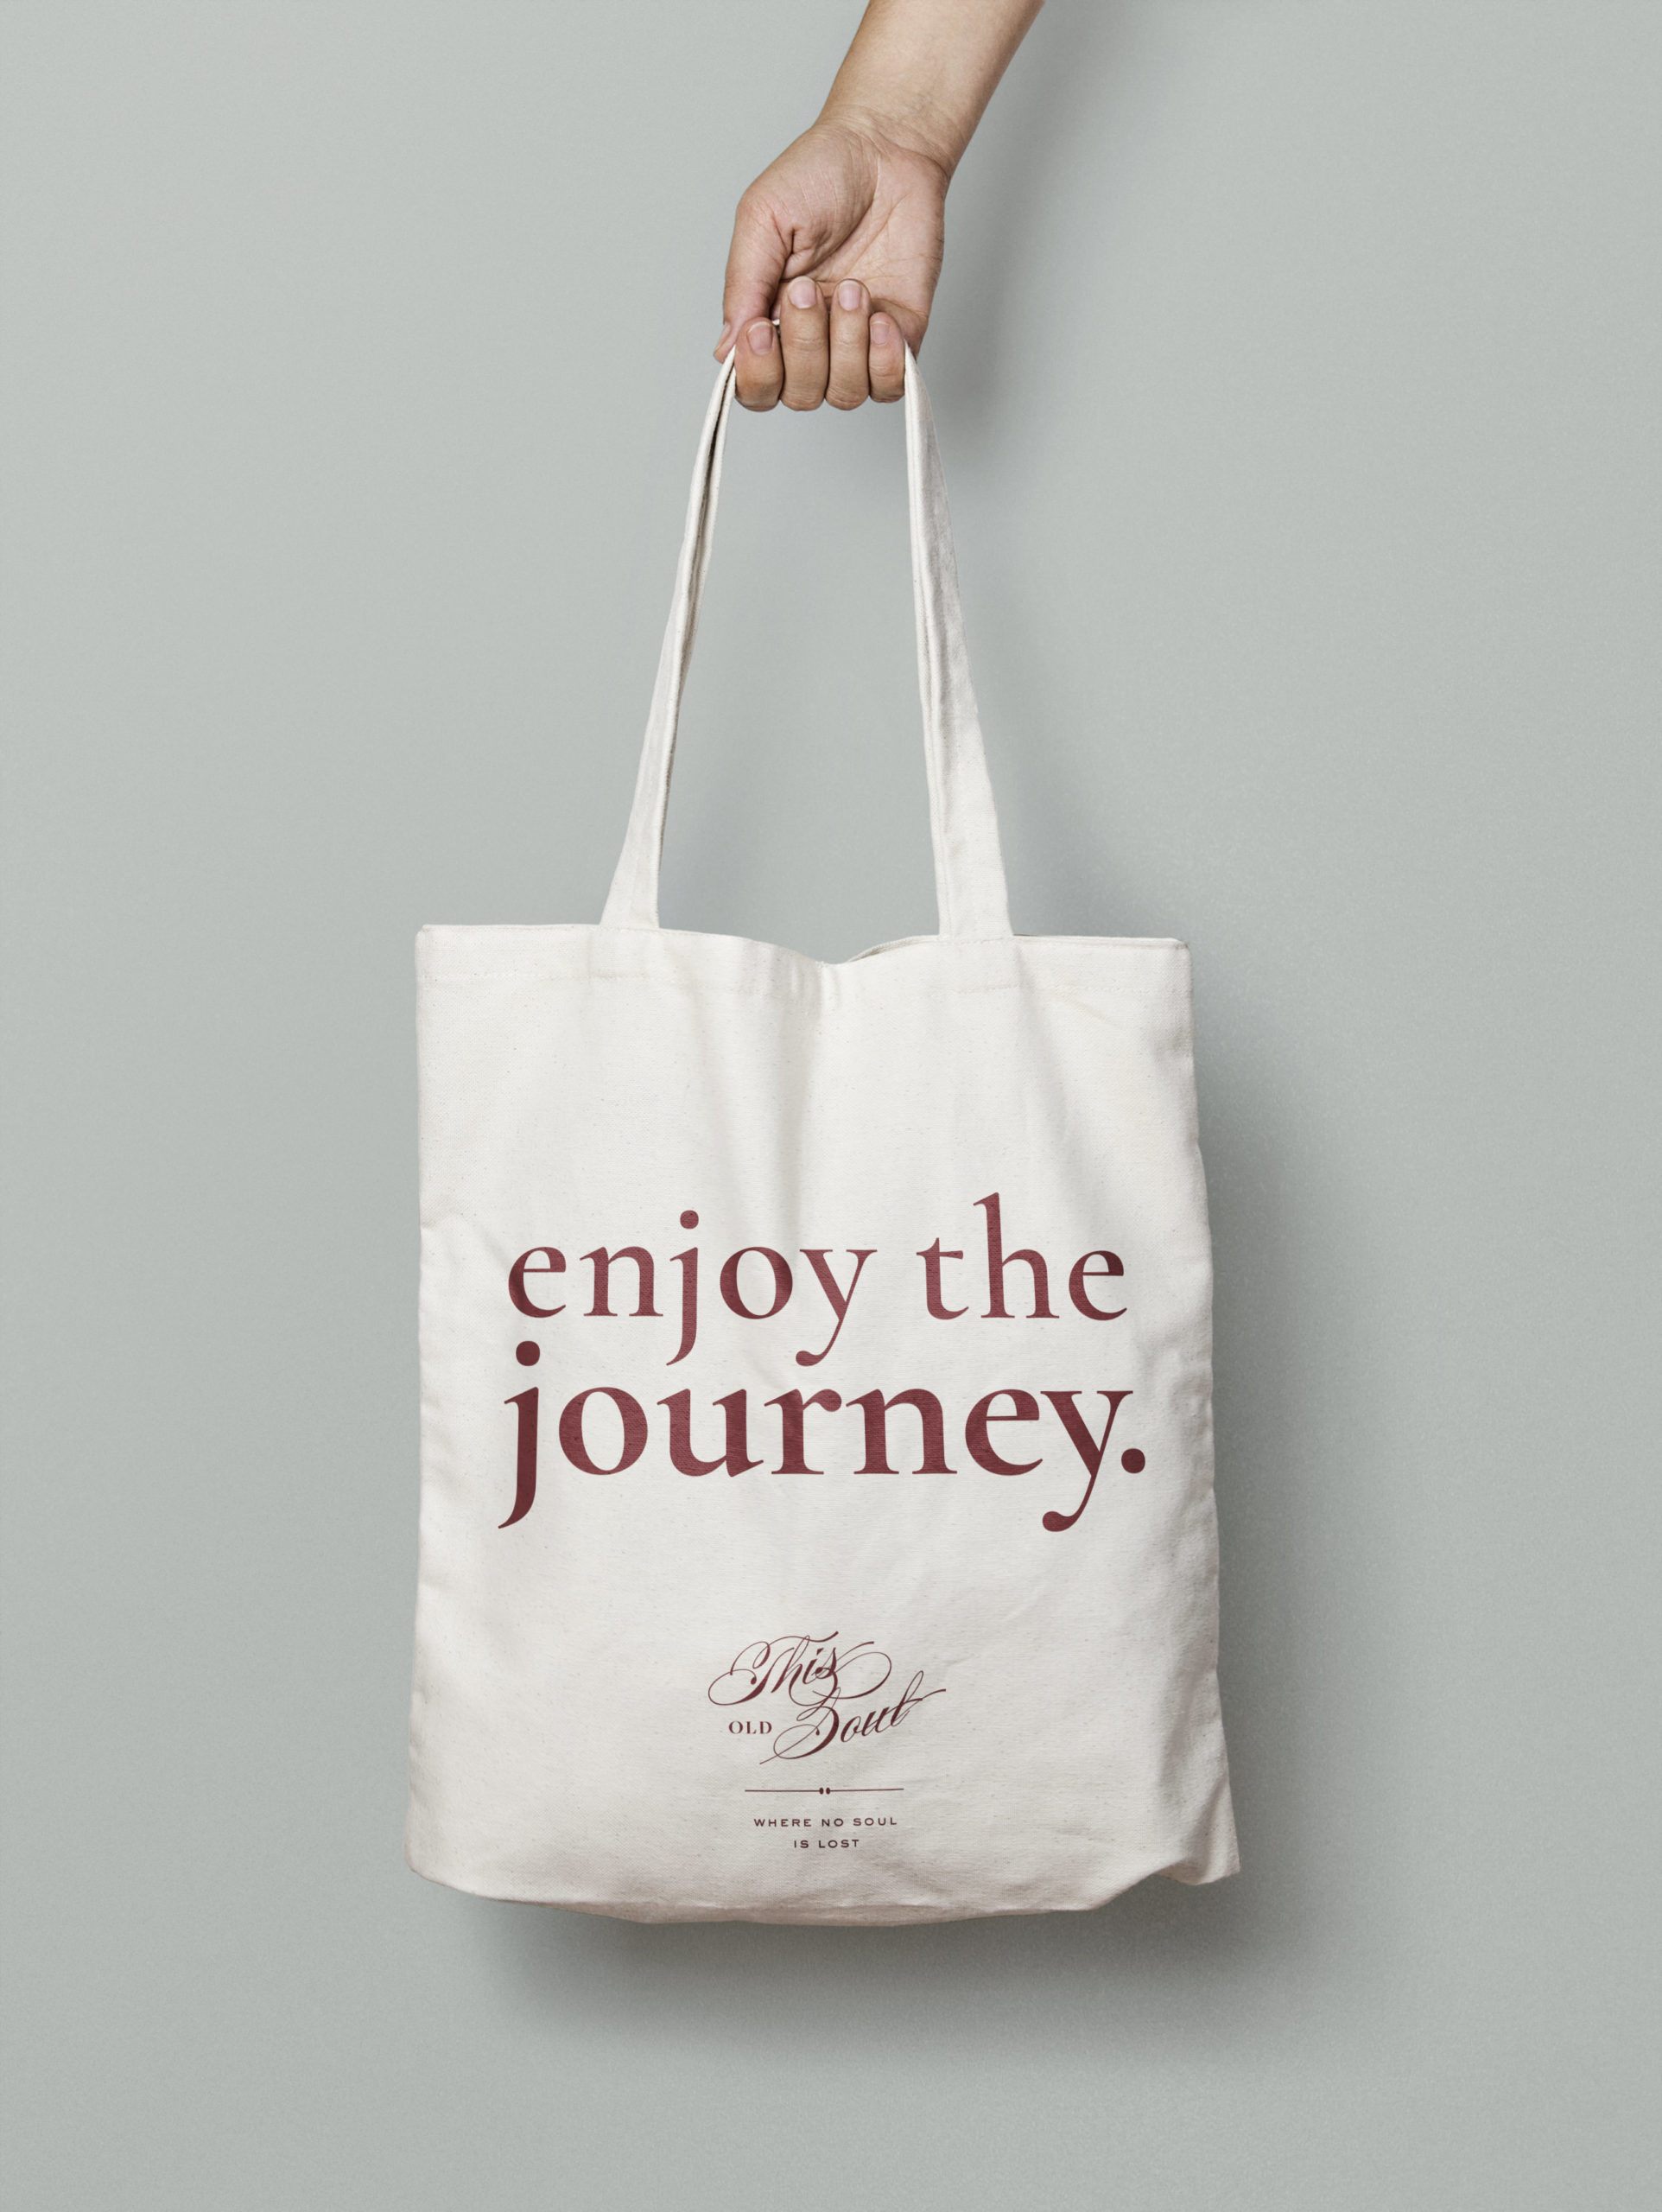 “Enjoy the journey” tote bag design for This Old Soul Photography